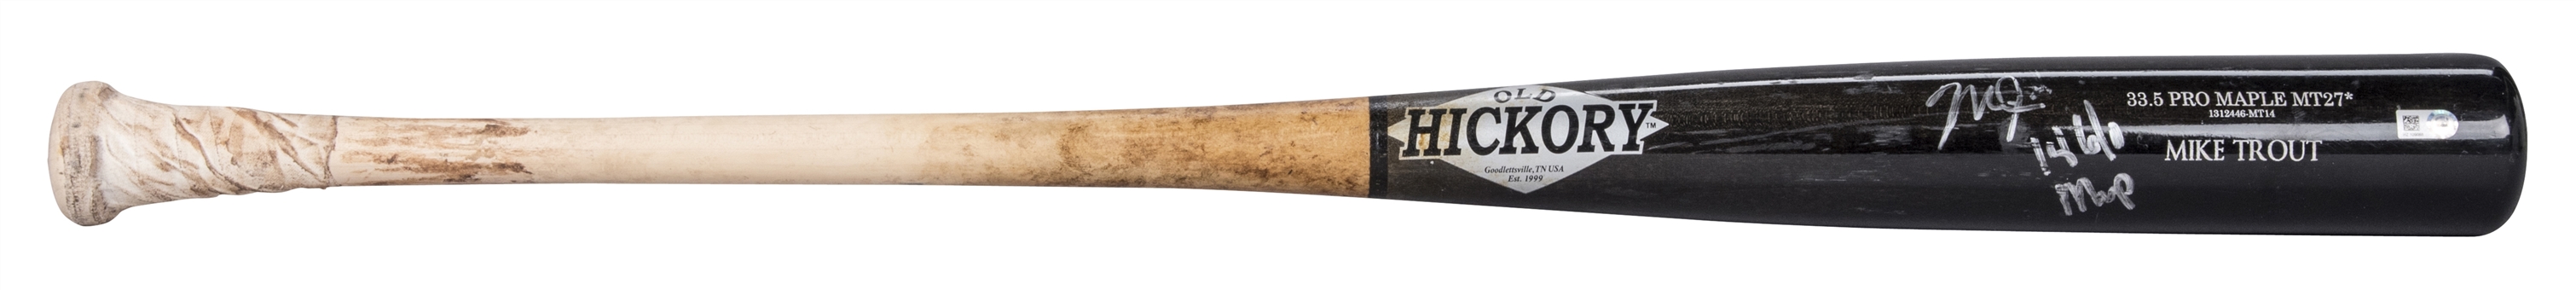 2014 Mike Trout MVP Season Game Used And Signed Old Hickory MT27 Model Bat (PSA/DNA GU 9 & Trout LOA)